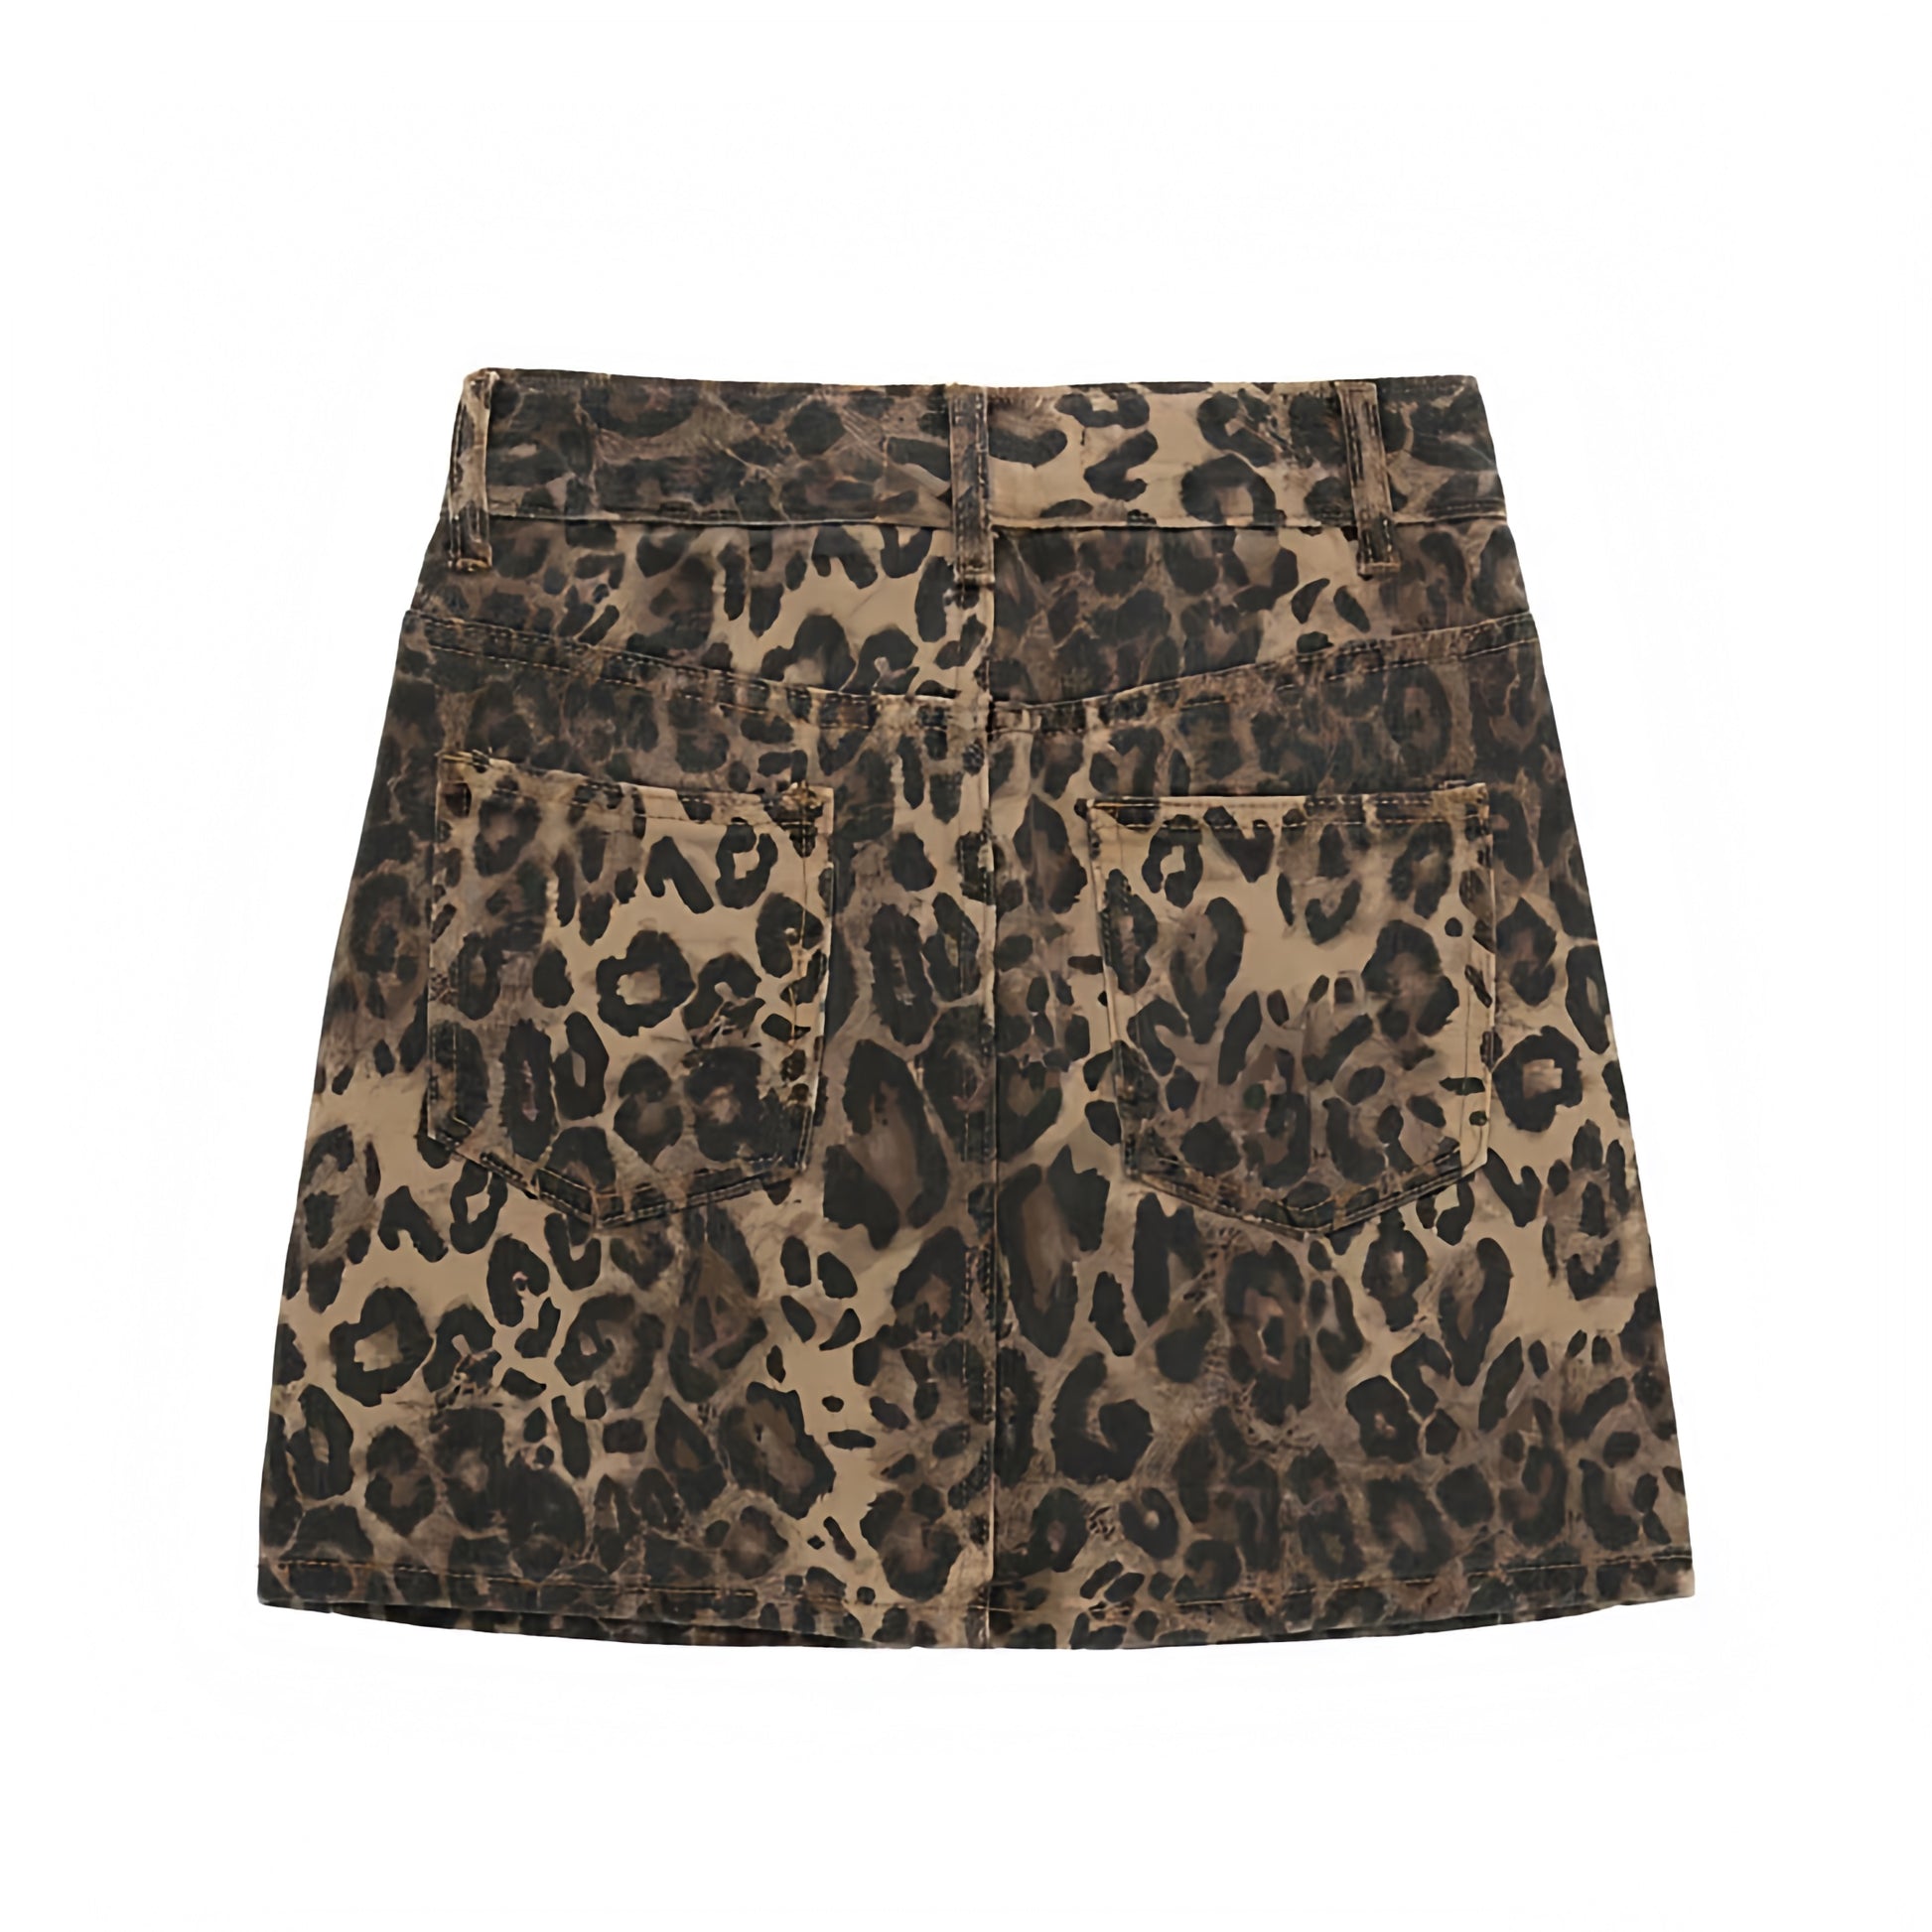 leopard-cheetah-animal-print-patterned-brown-black-multi-color-slim-tight-fit-mid-high-rise-waisted-denim-jean-short-mini-skirt-with-pockets-women-ladies-chic-trendy-spring-2024-summer-casual-classy-y2k-party-club-wear-sexy-date-night-out-exotic-zara-revolve-white-fox-jaded-london-princess-polly-edikted